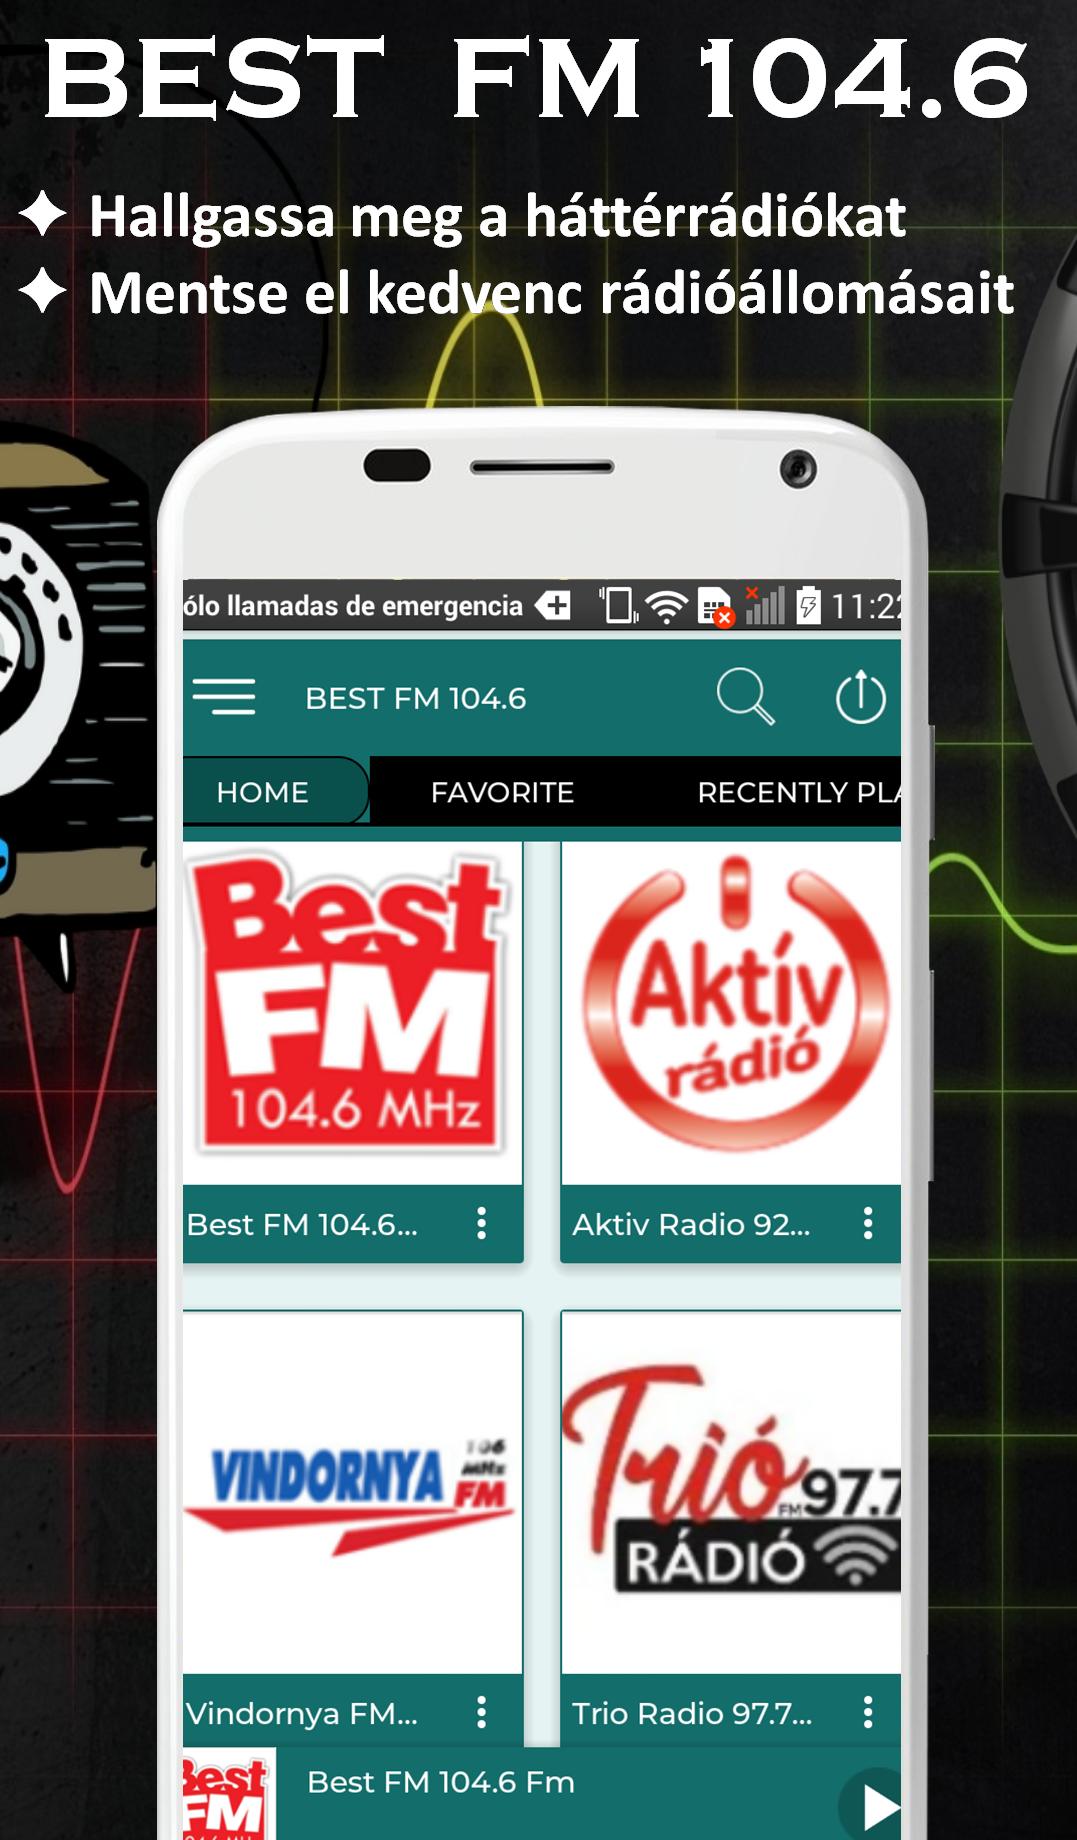 RadioBest 104.6 Live Hungary for Android - APK Download